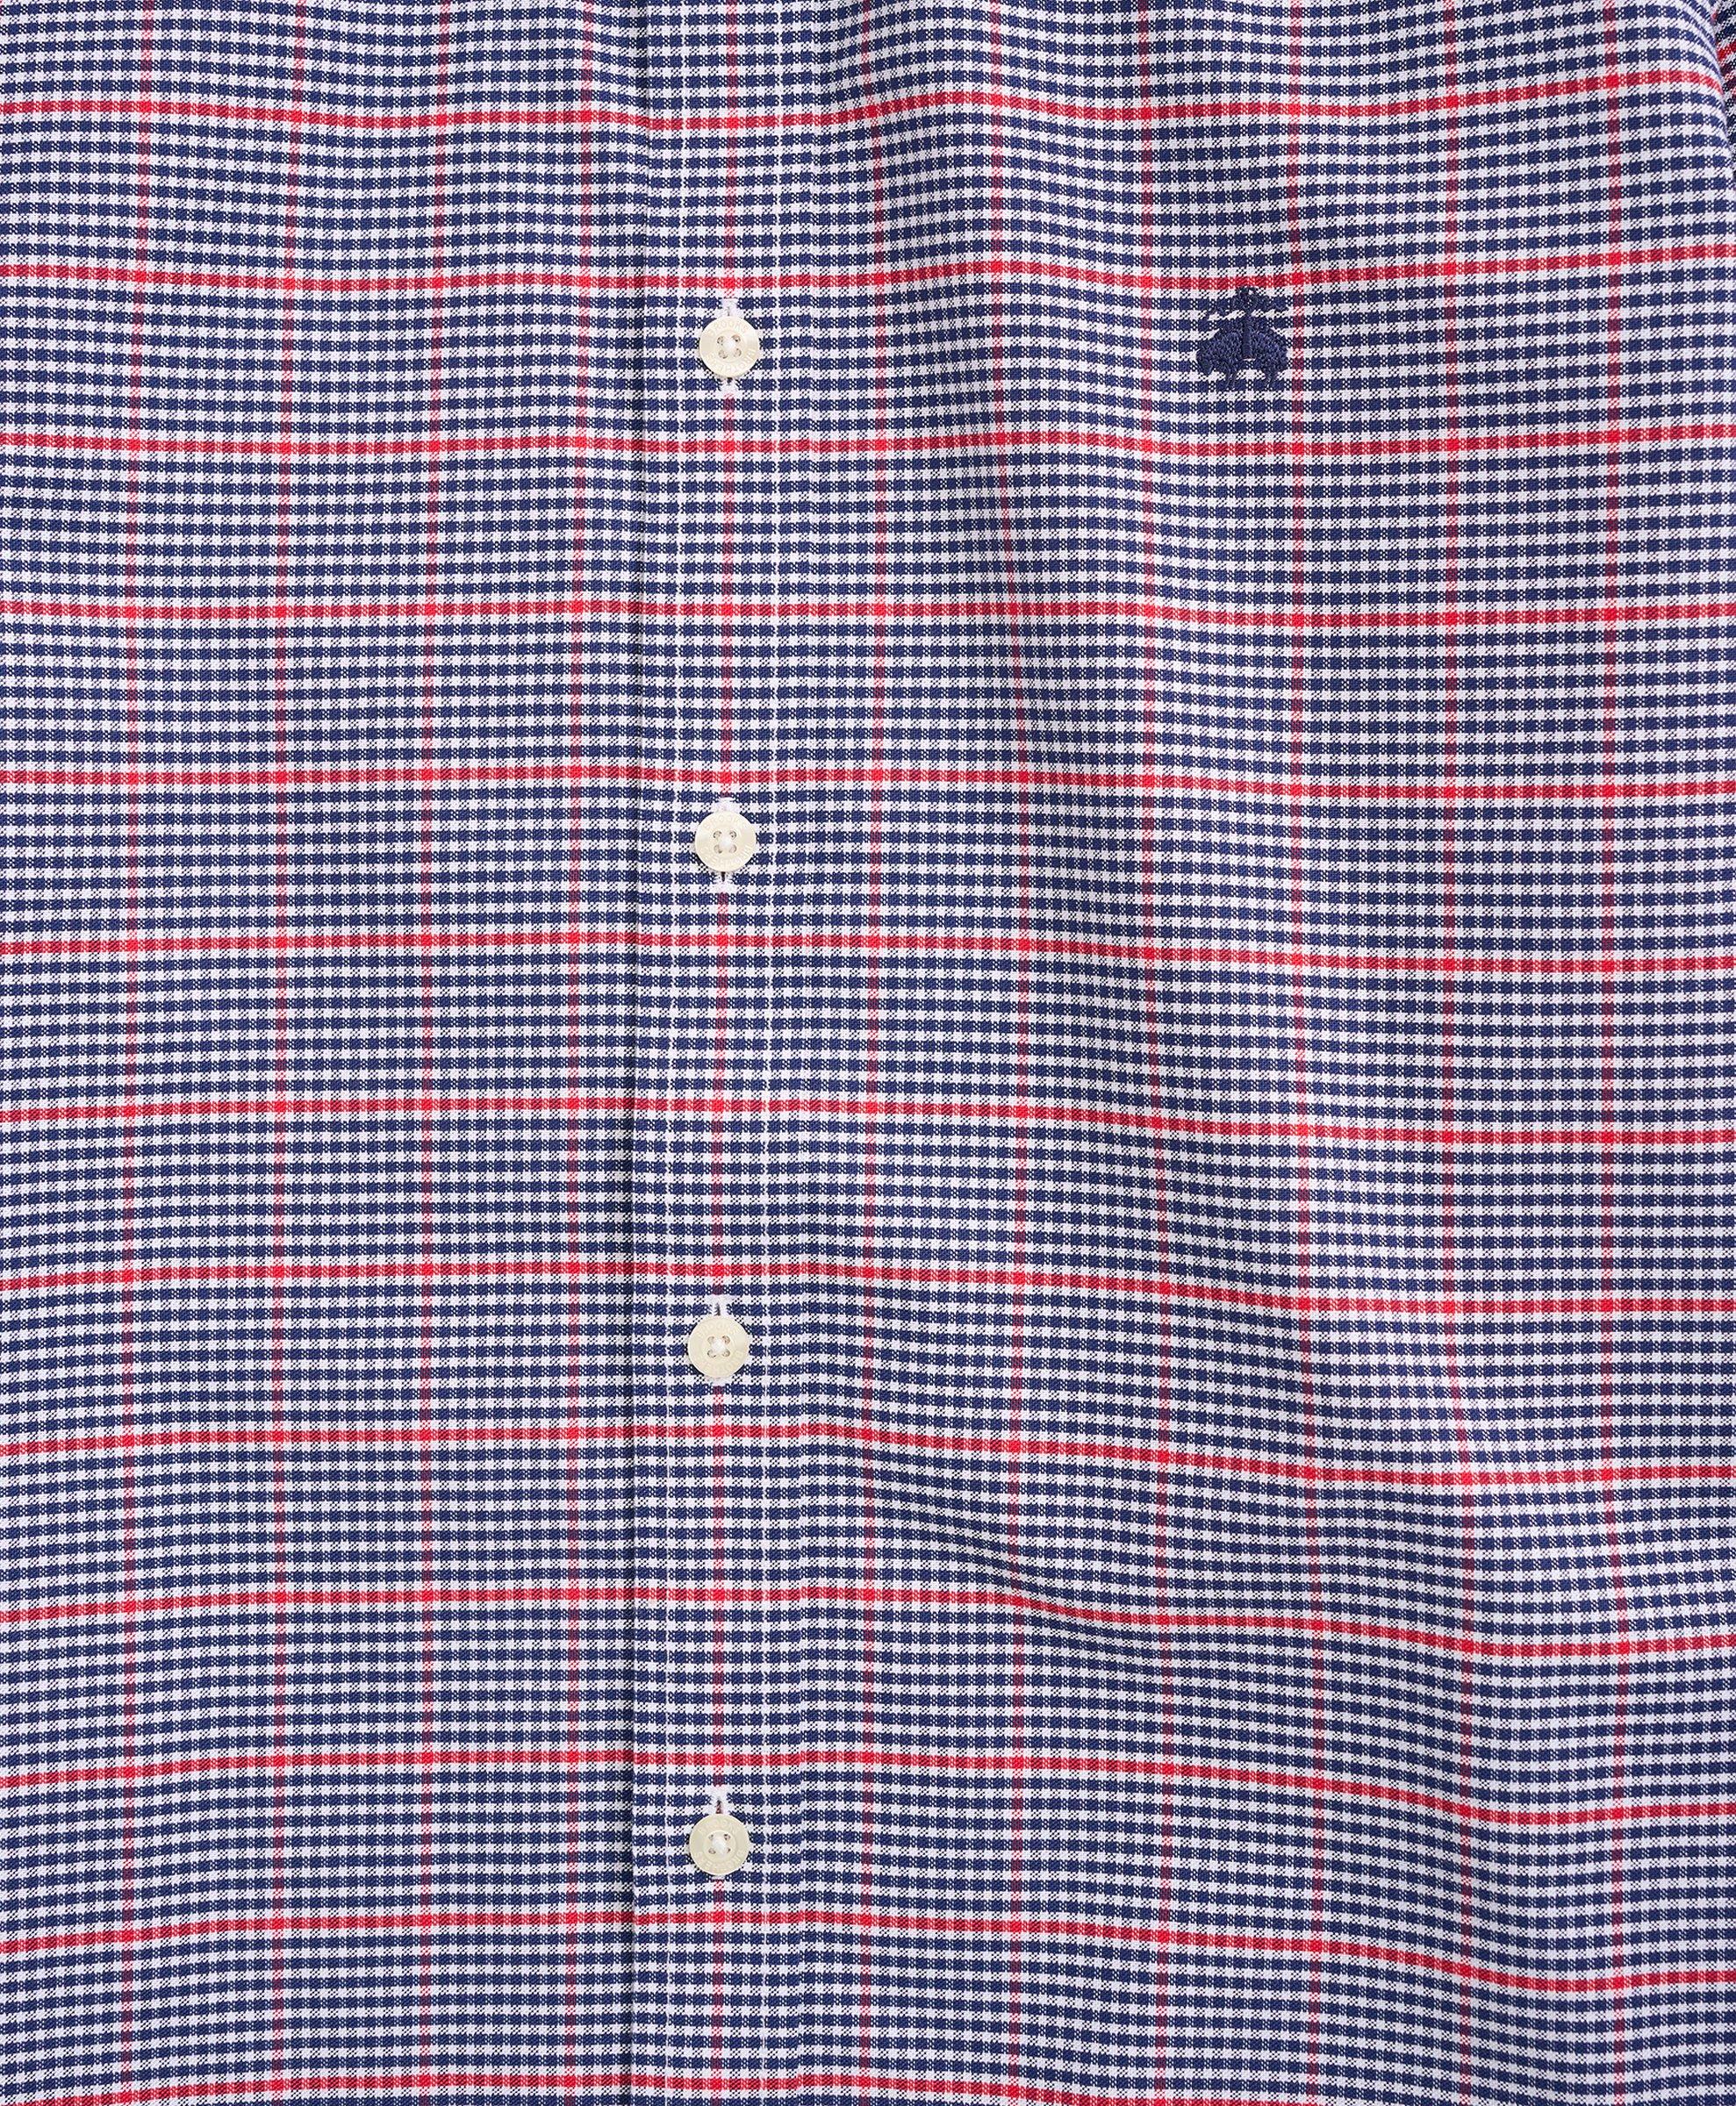 Stretch Madison Relaxed-Fit Sport Shirt, Non-Iron Oxford Button Down Collar Micro-Check, image 2